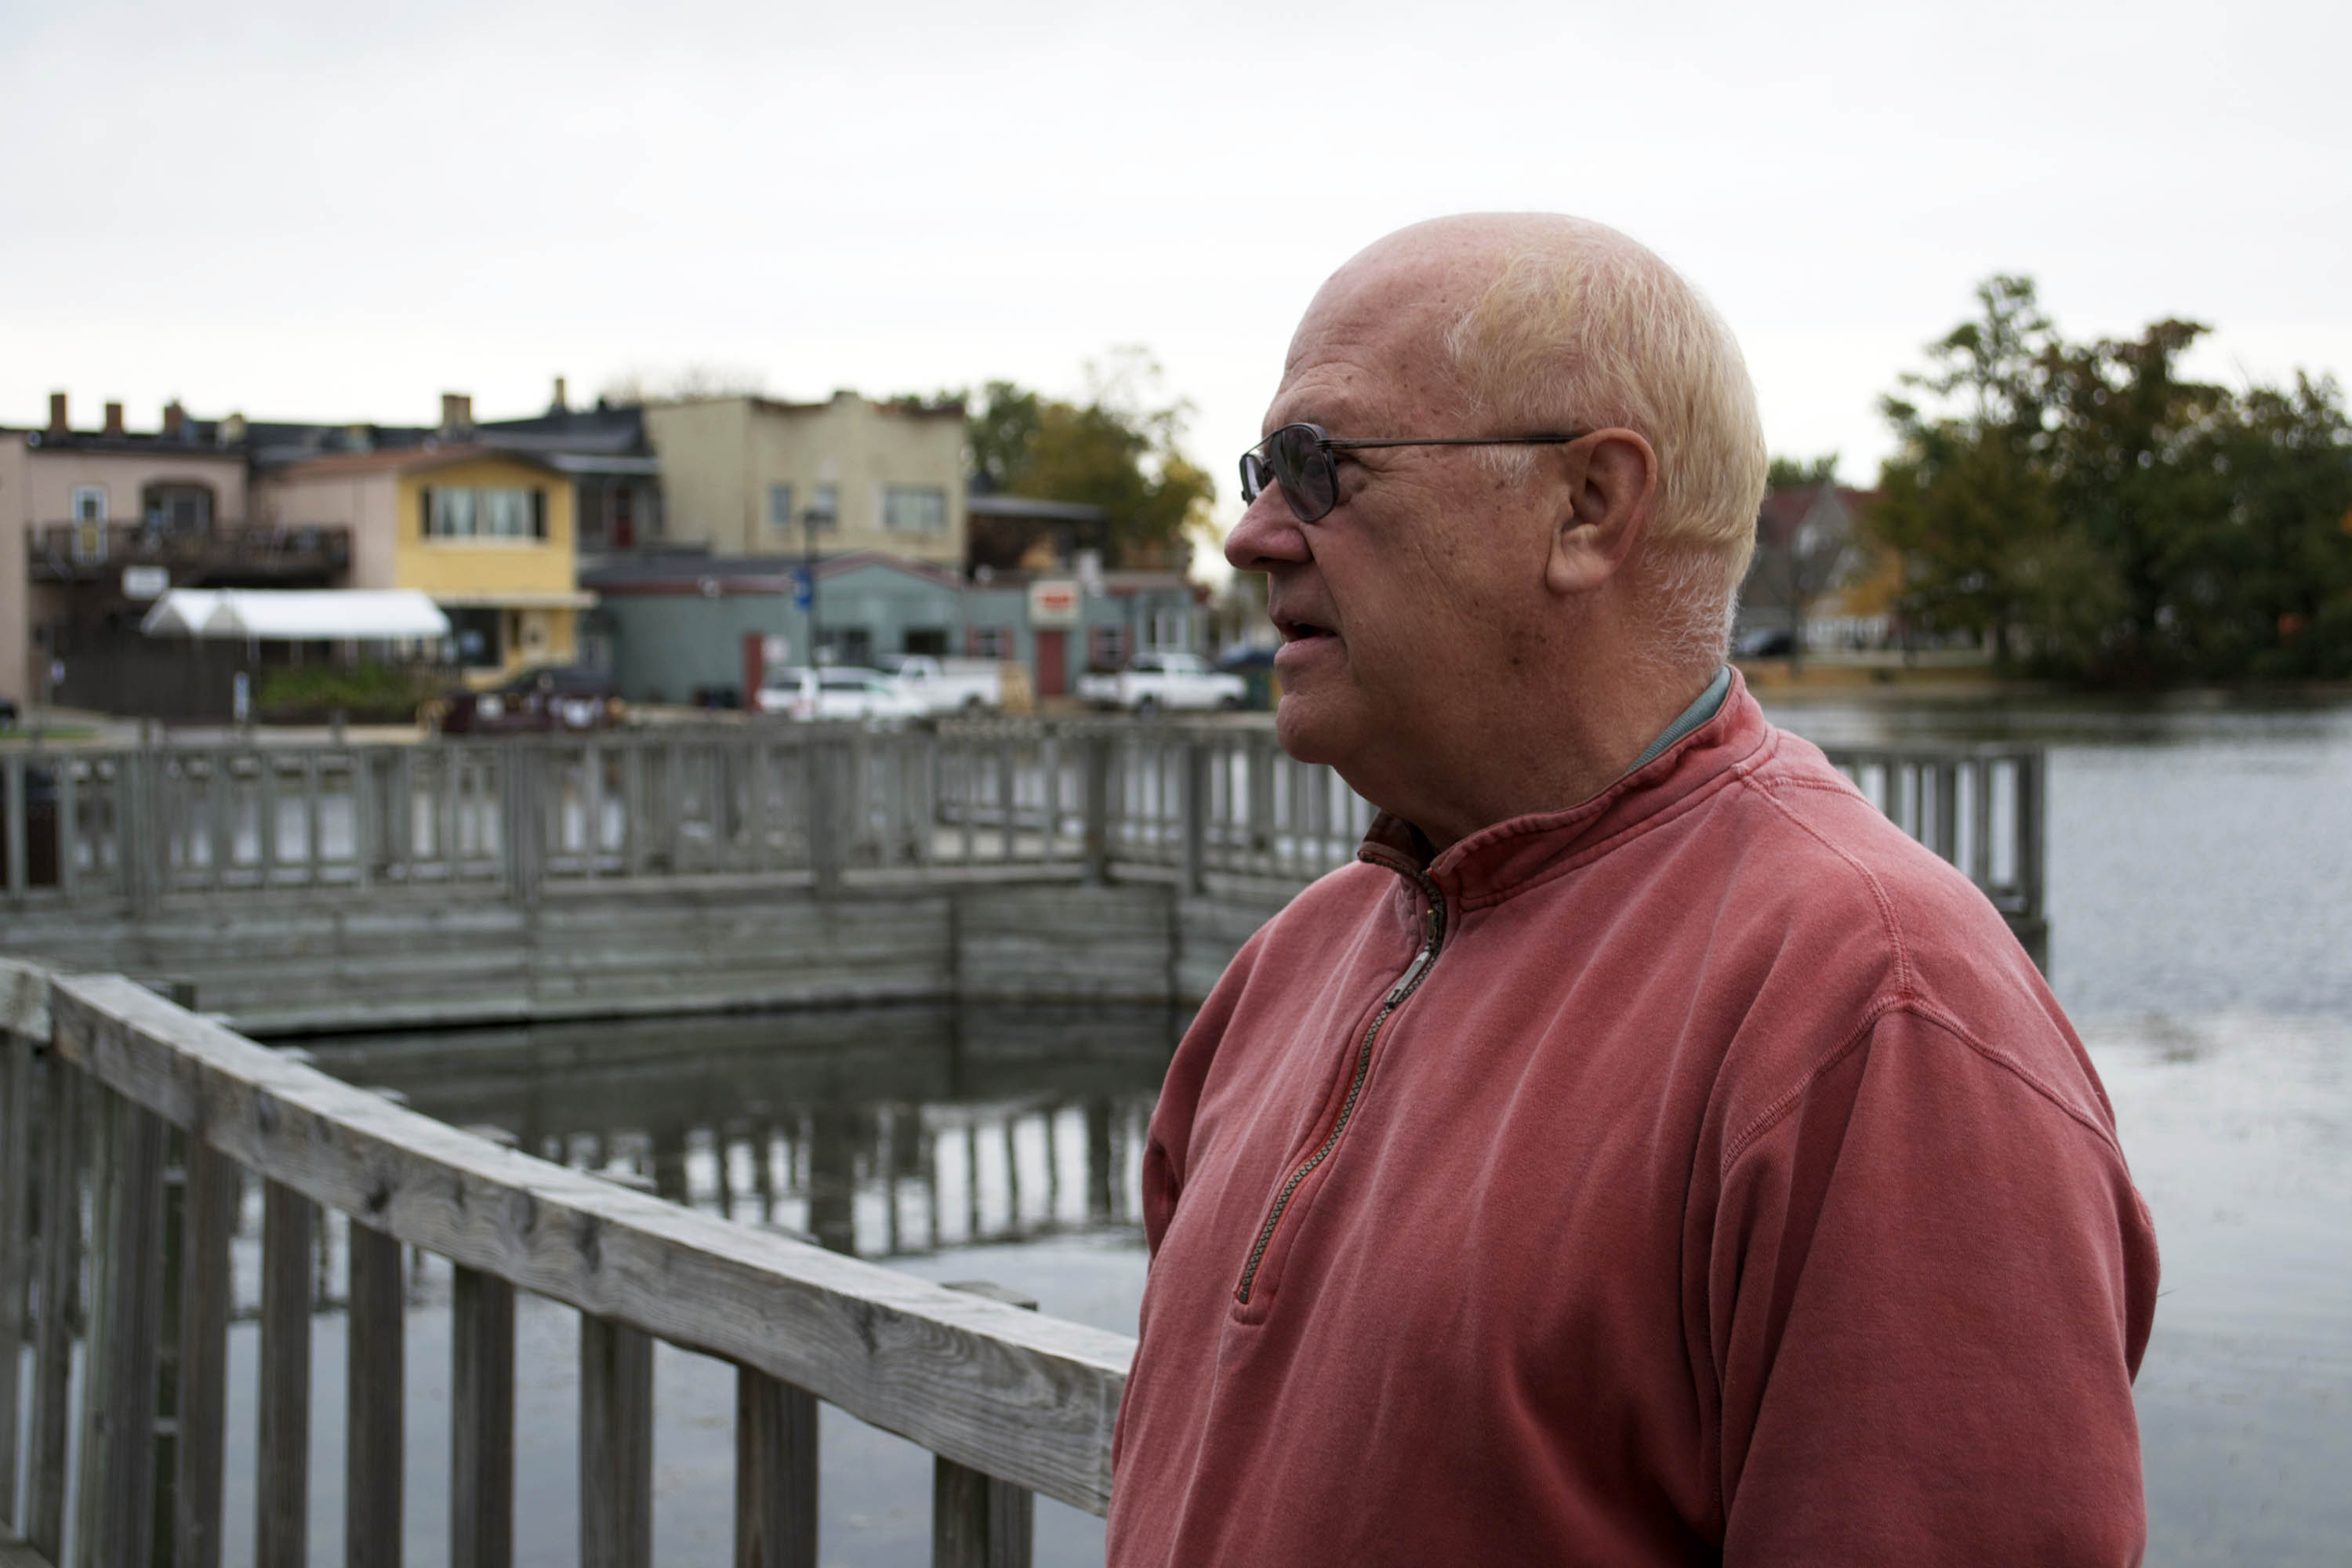 Dick Pas, the chairman for Waukesha County's democratic party, stands by the lake outside his favorite cafe in Oconomowoc.
Photo by: Sam Easton